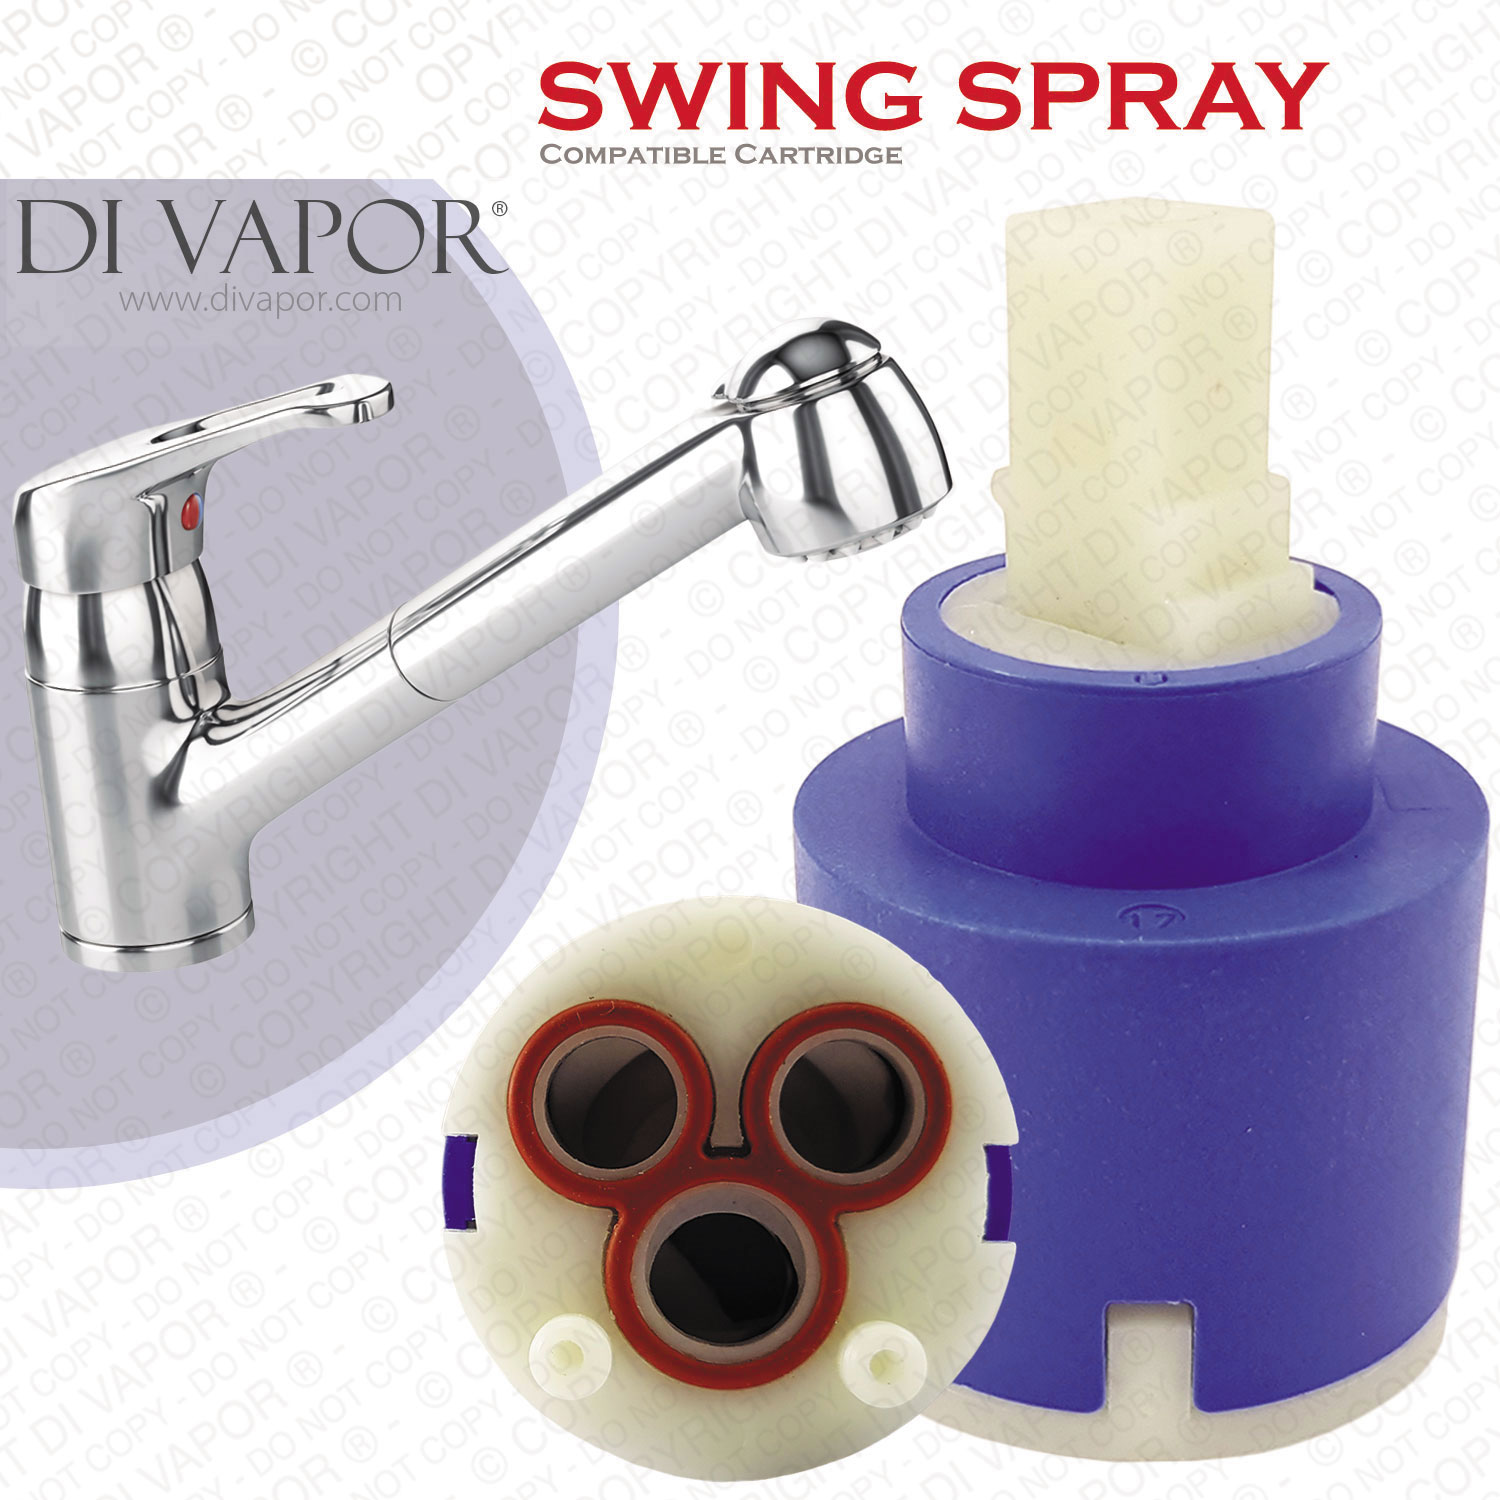 Franke Swing Spray (New Version) 40mm Single Lever Cartridge Replacement - 133.0171.286 Compatible C